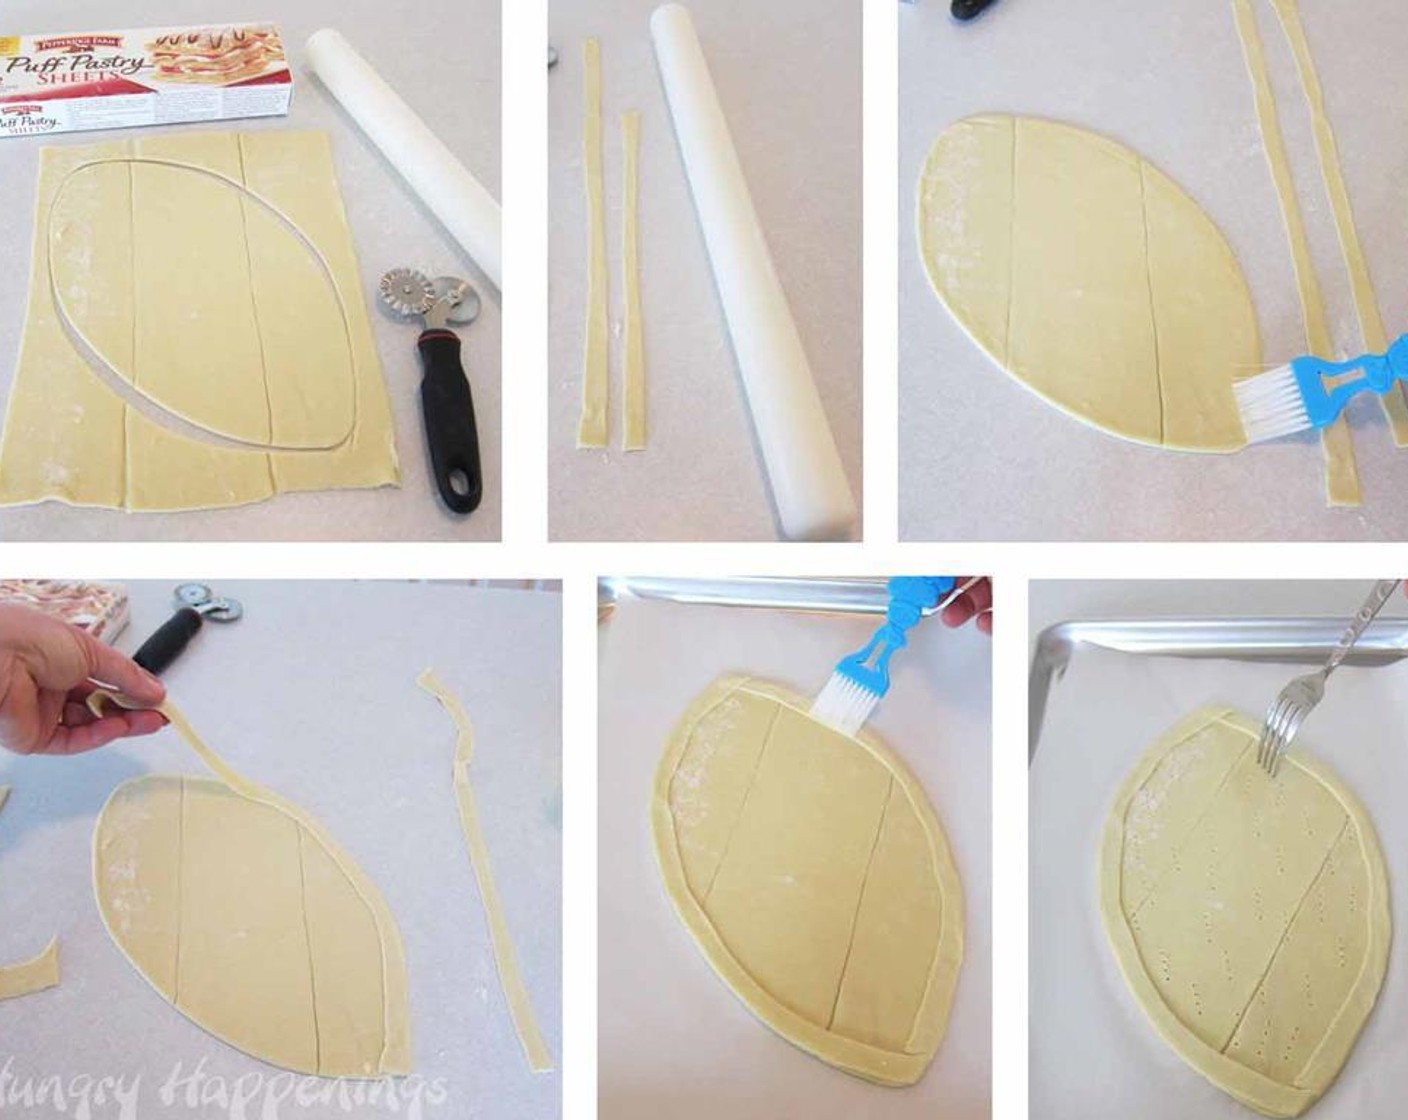 step 2 Lightly dust a cutting board with flour. Unfold the Puff Pastry (1 pckg). Use a rolling pin to roll the pastry dough into a 12x14-inch rectangle. Cut 1/4-inch wide strip from each side of the dough.